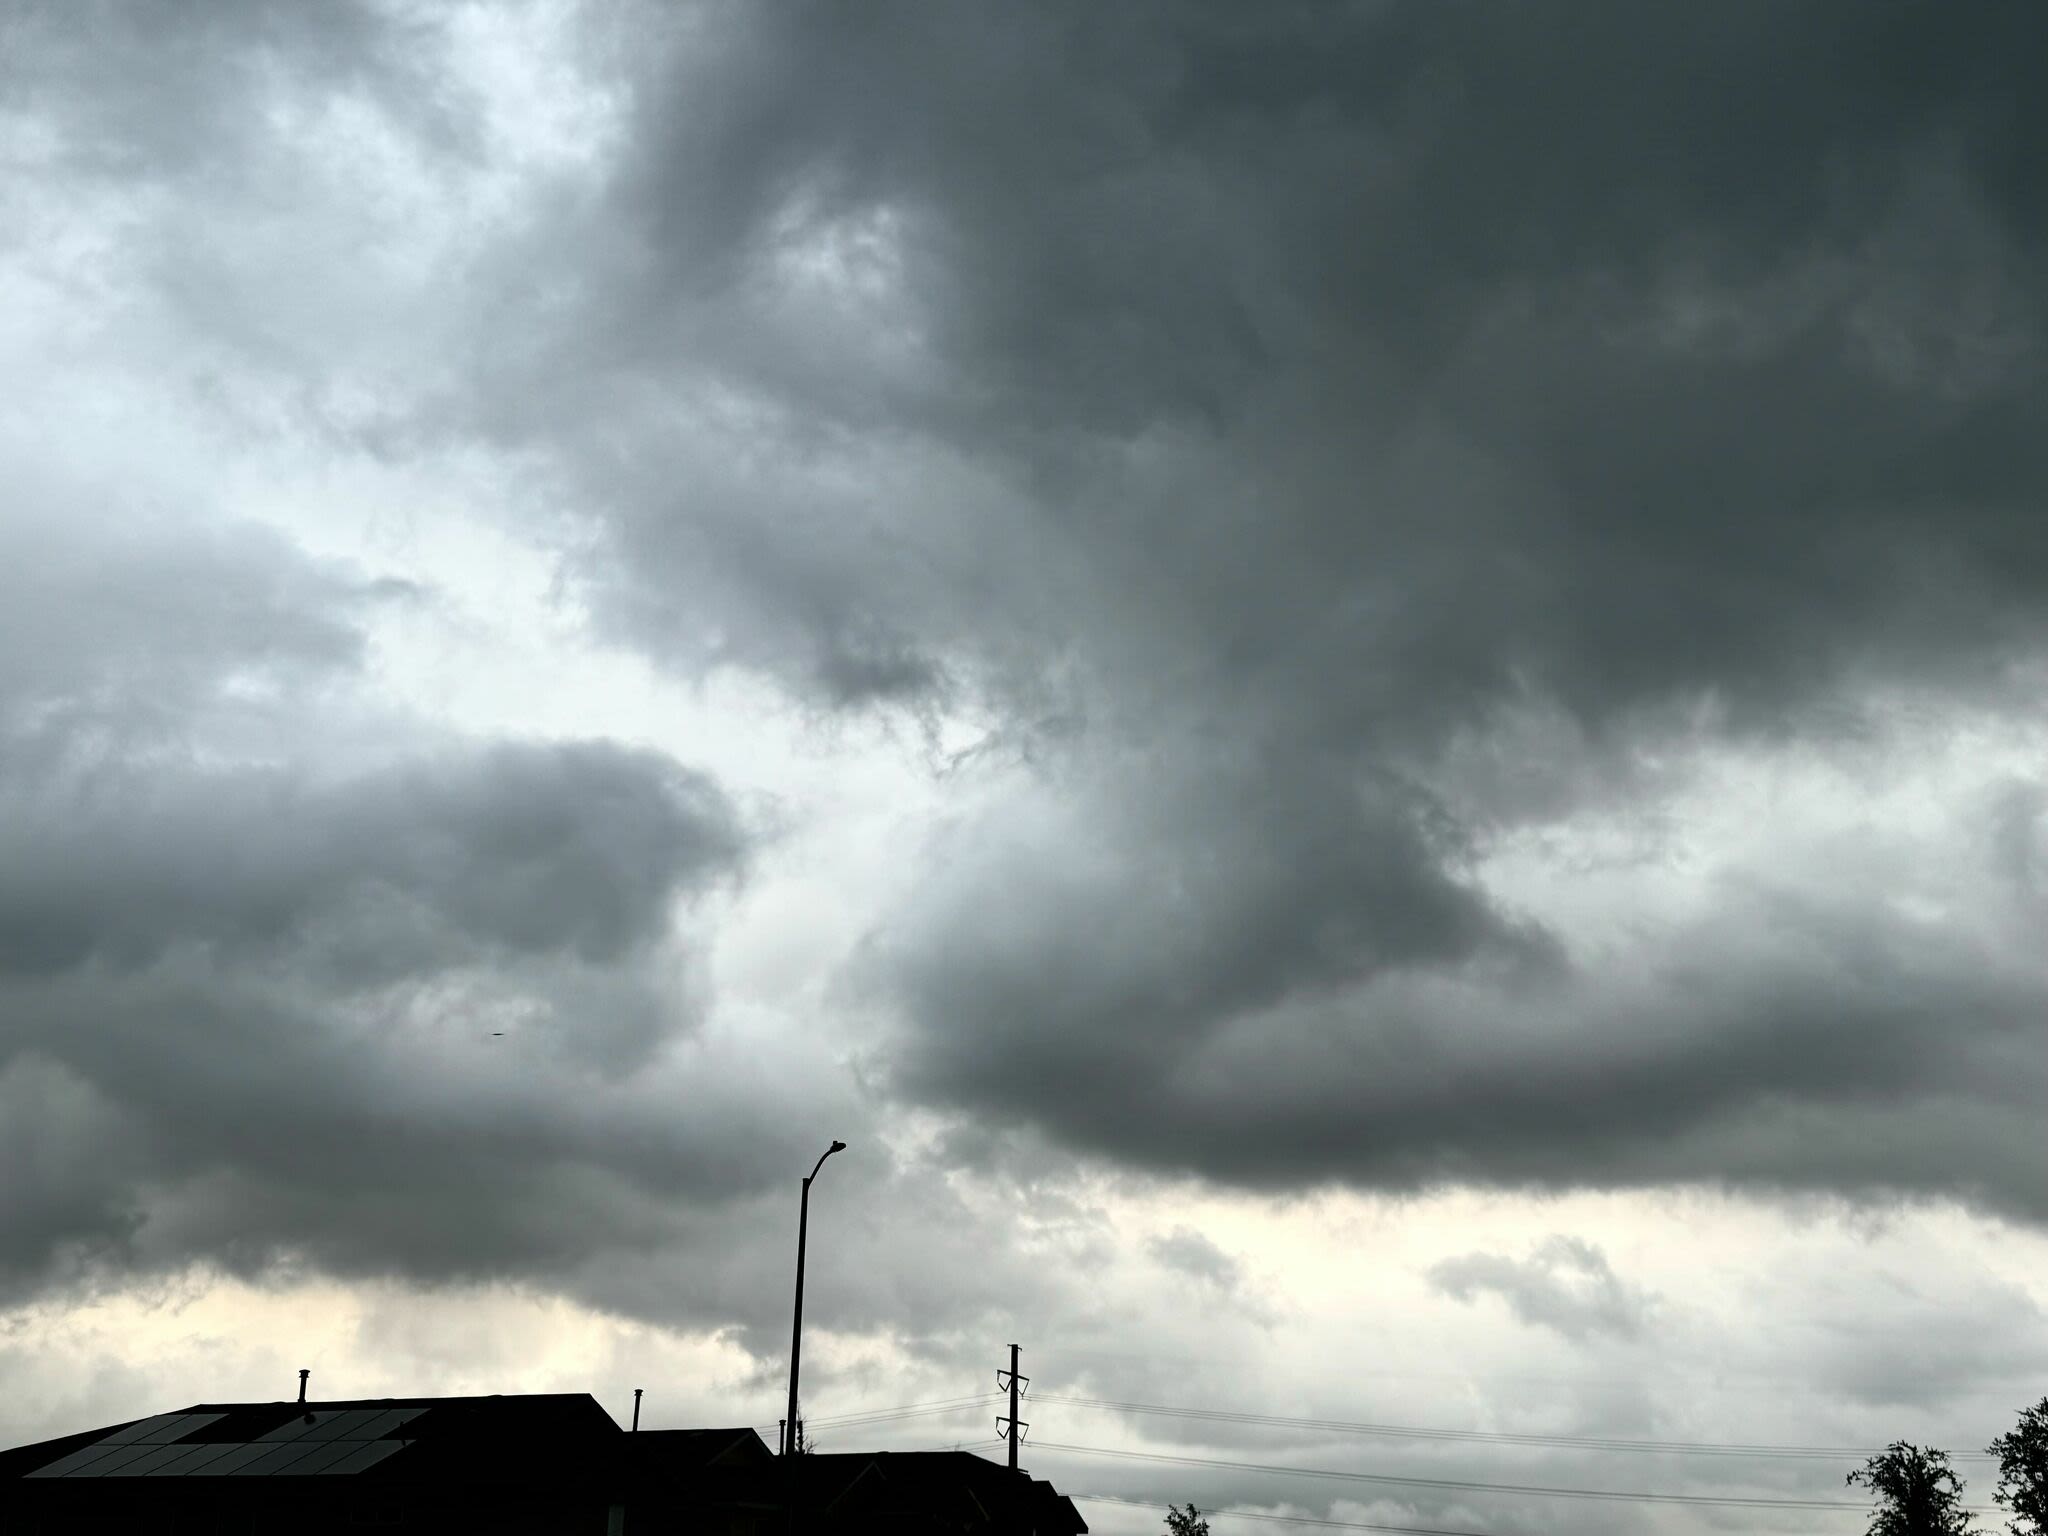 Severe storm risk with chance of hail returns to San Antonio area